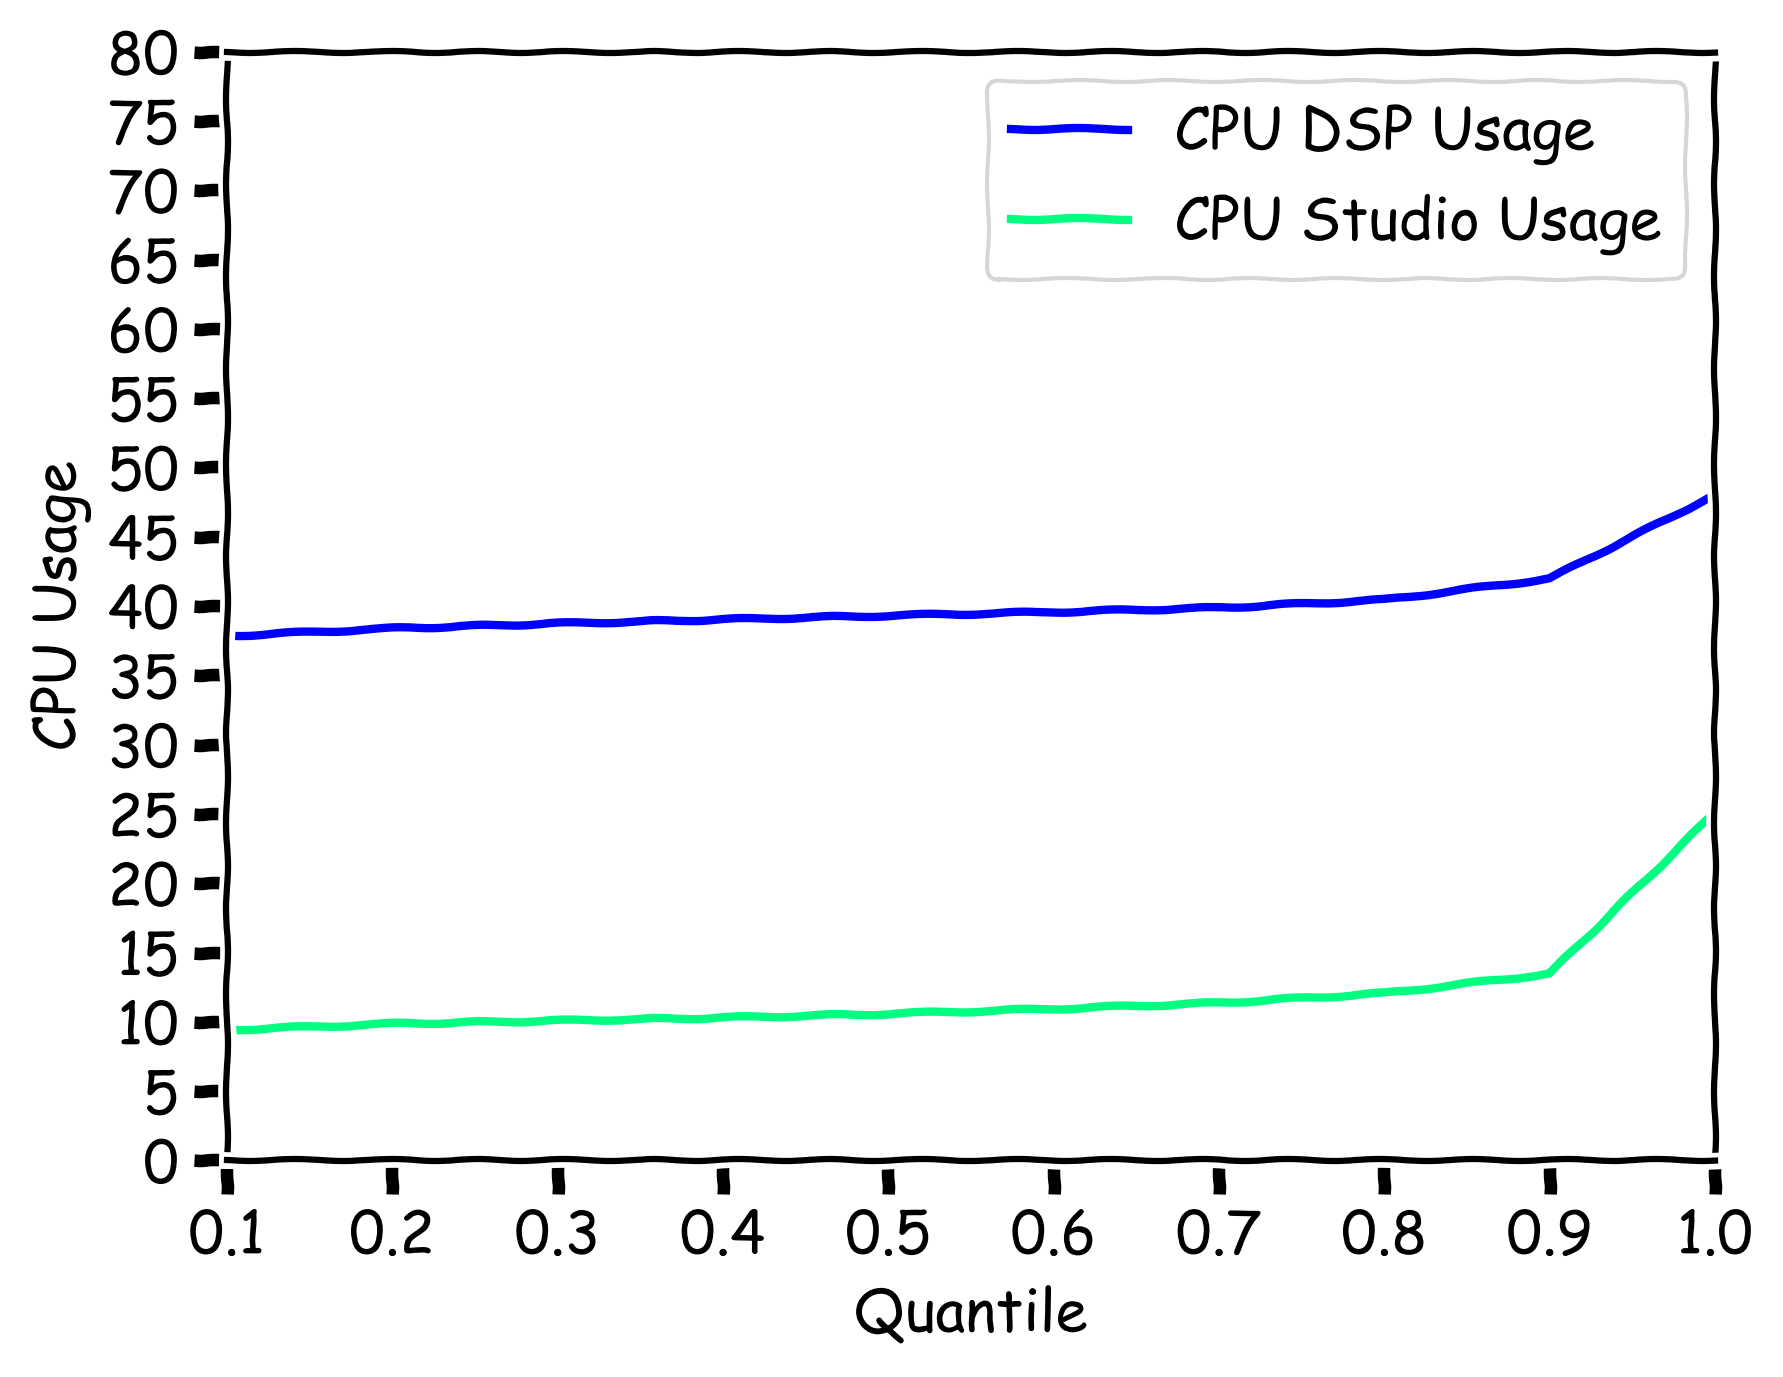 Example of the CPU profiling results plotted by quantiles